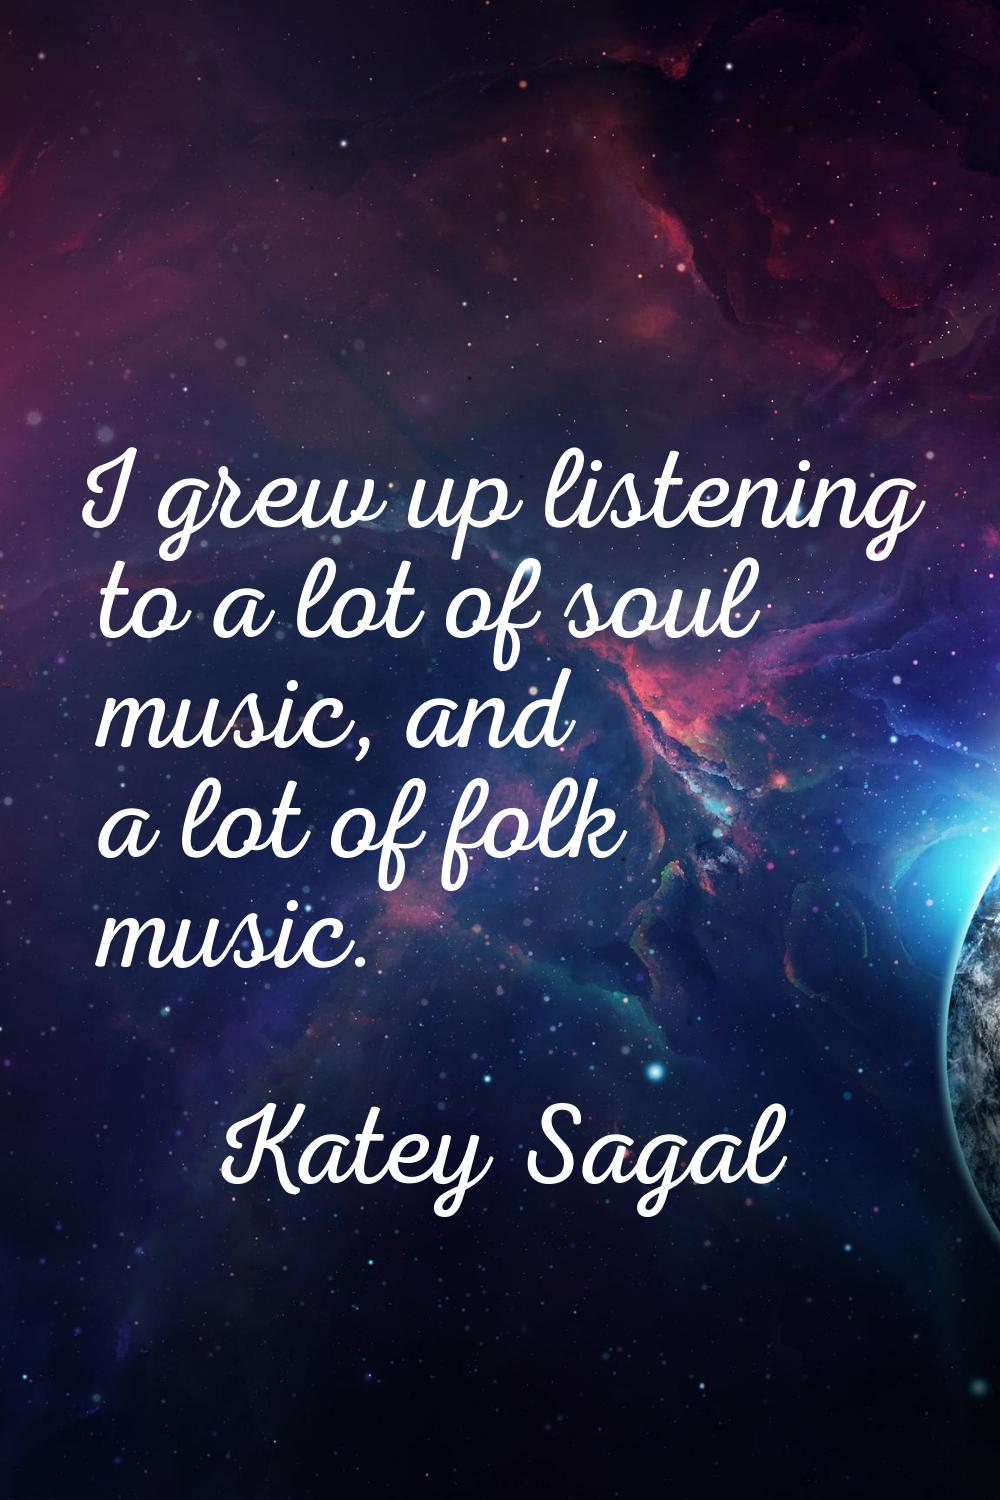 I grew up listening to a lot of soul music, and a lot of folk music.